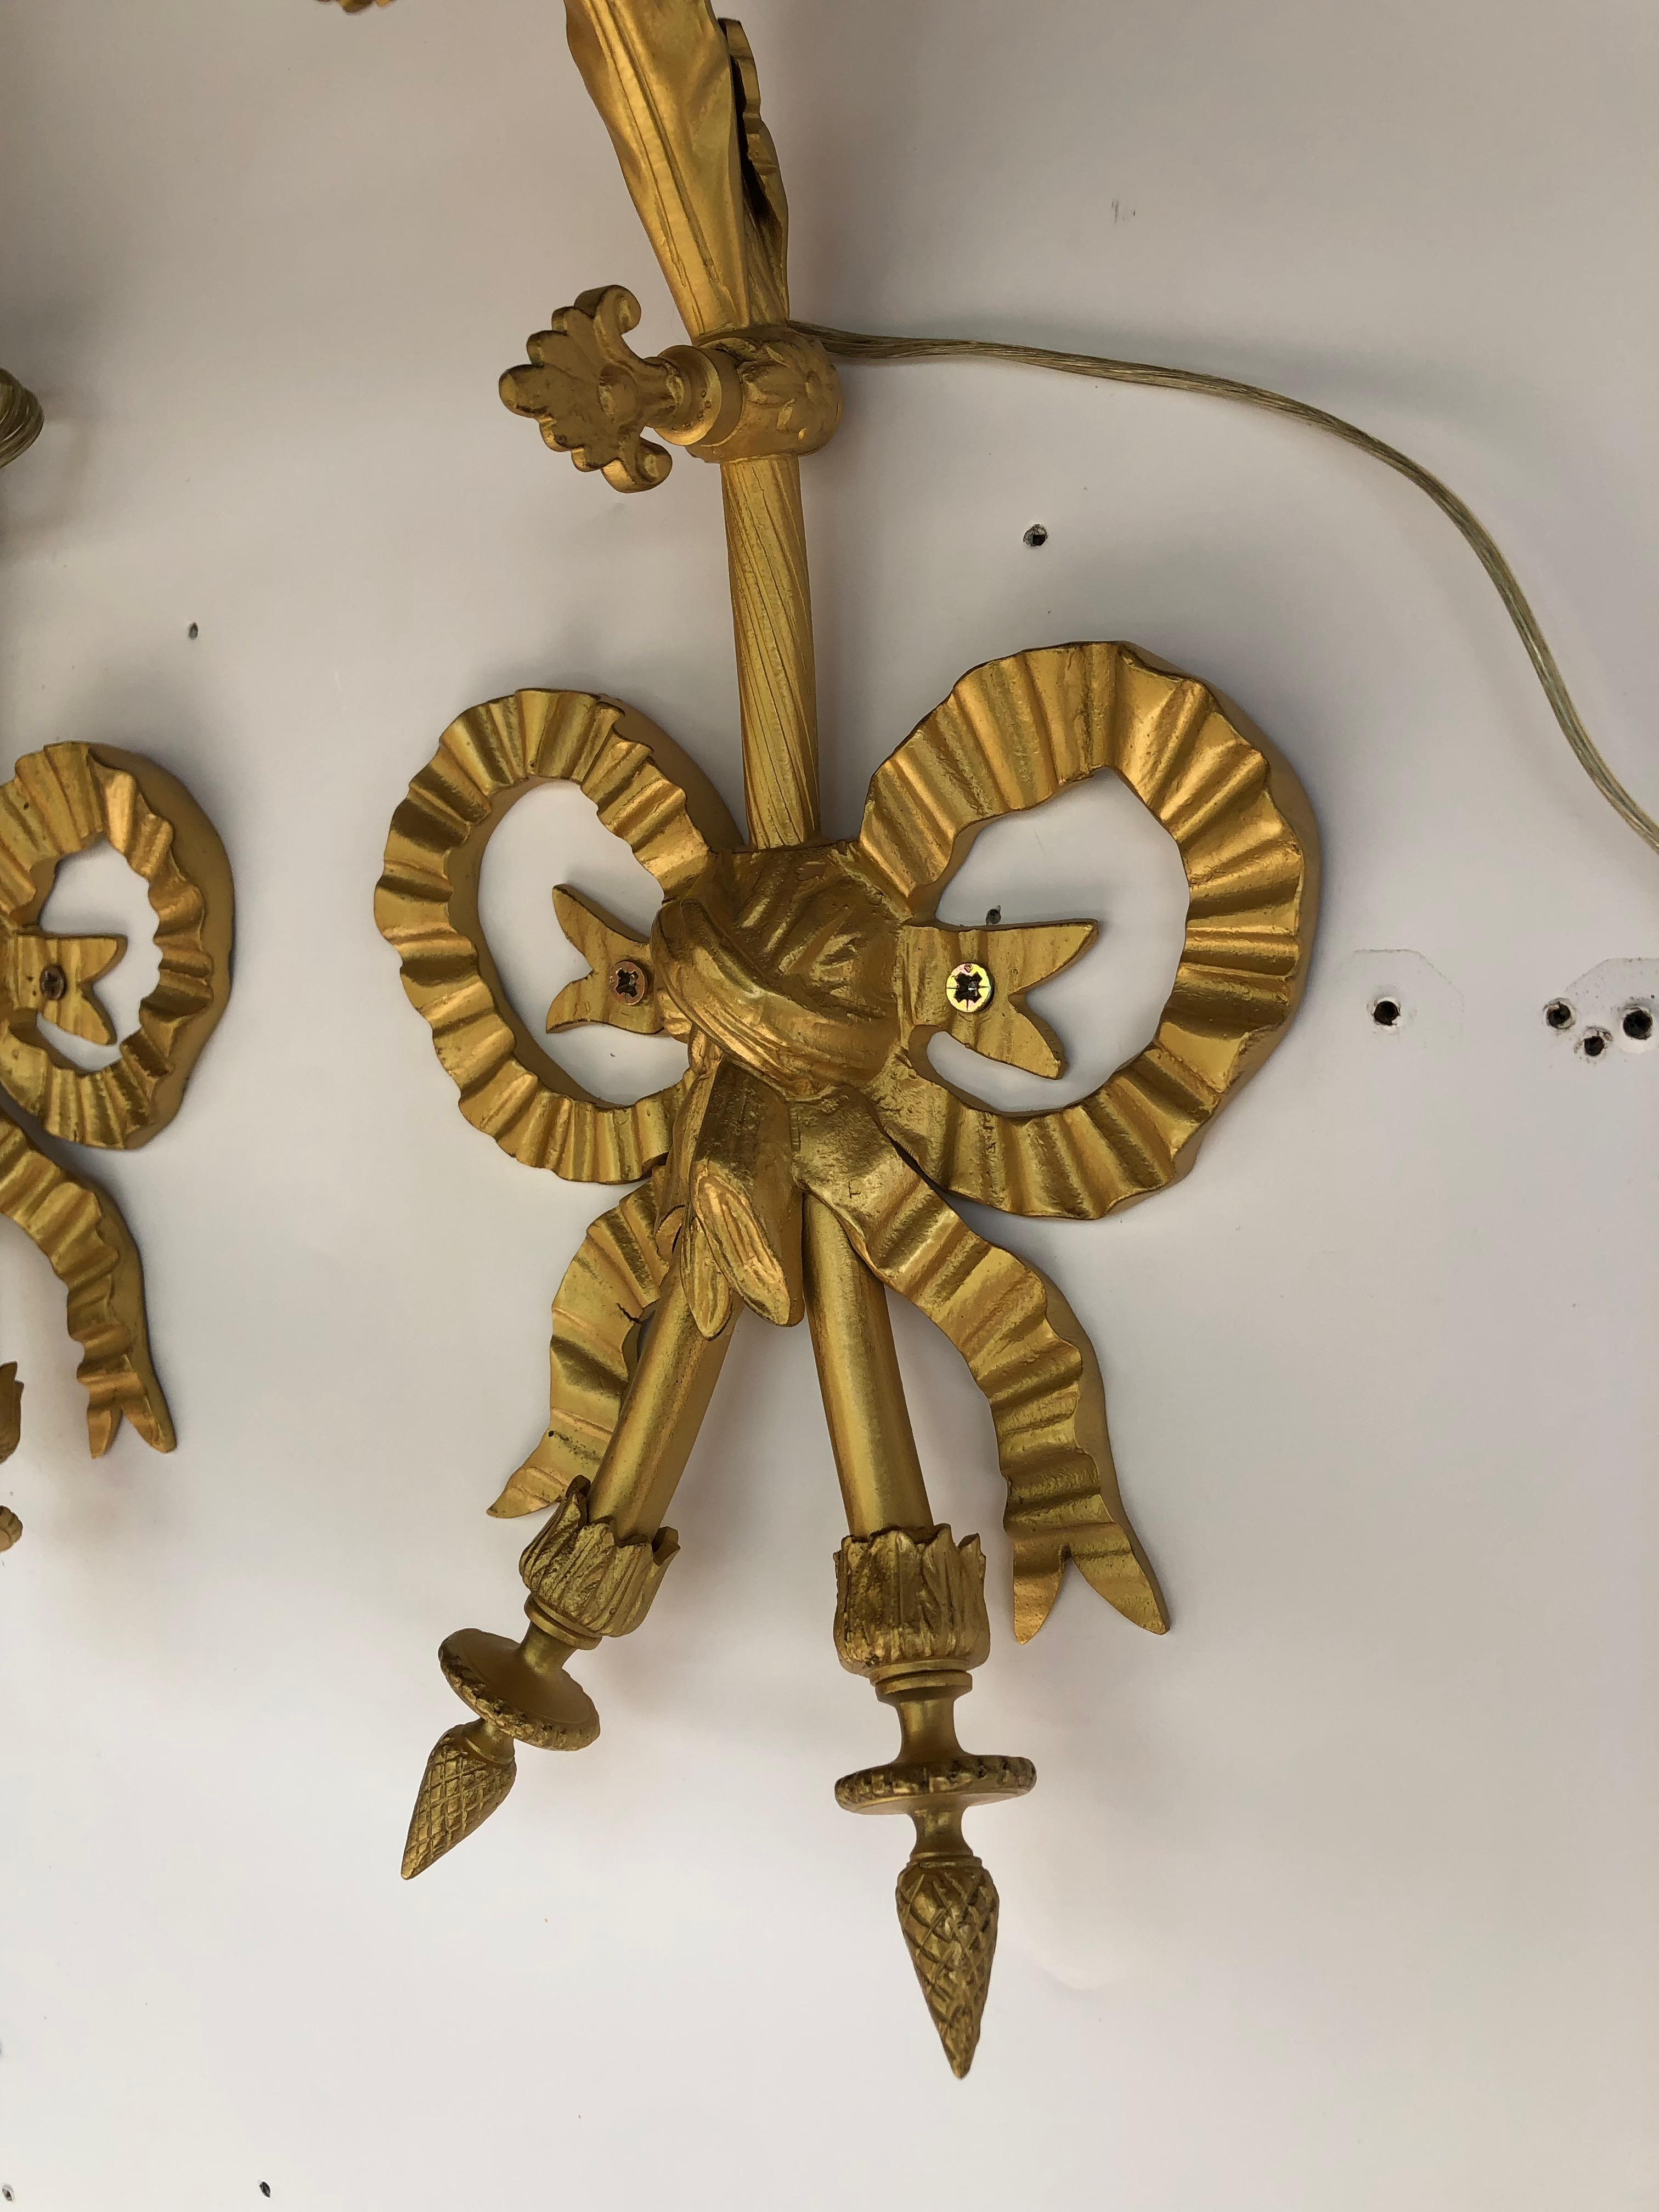 Bronze sconces around 1900 in the Louis XVI style.
Opalescent glass tulips.
Walls originally in gas and confertis in electricity.
In very good condition and electrified.
One of the tulips has small chips

Width: 15 cm
Height: 35 cm
Depth: 30